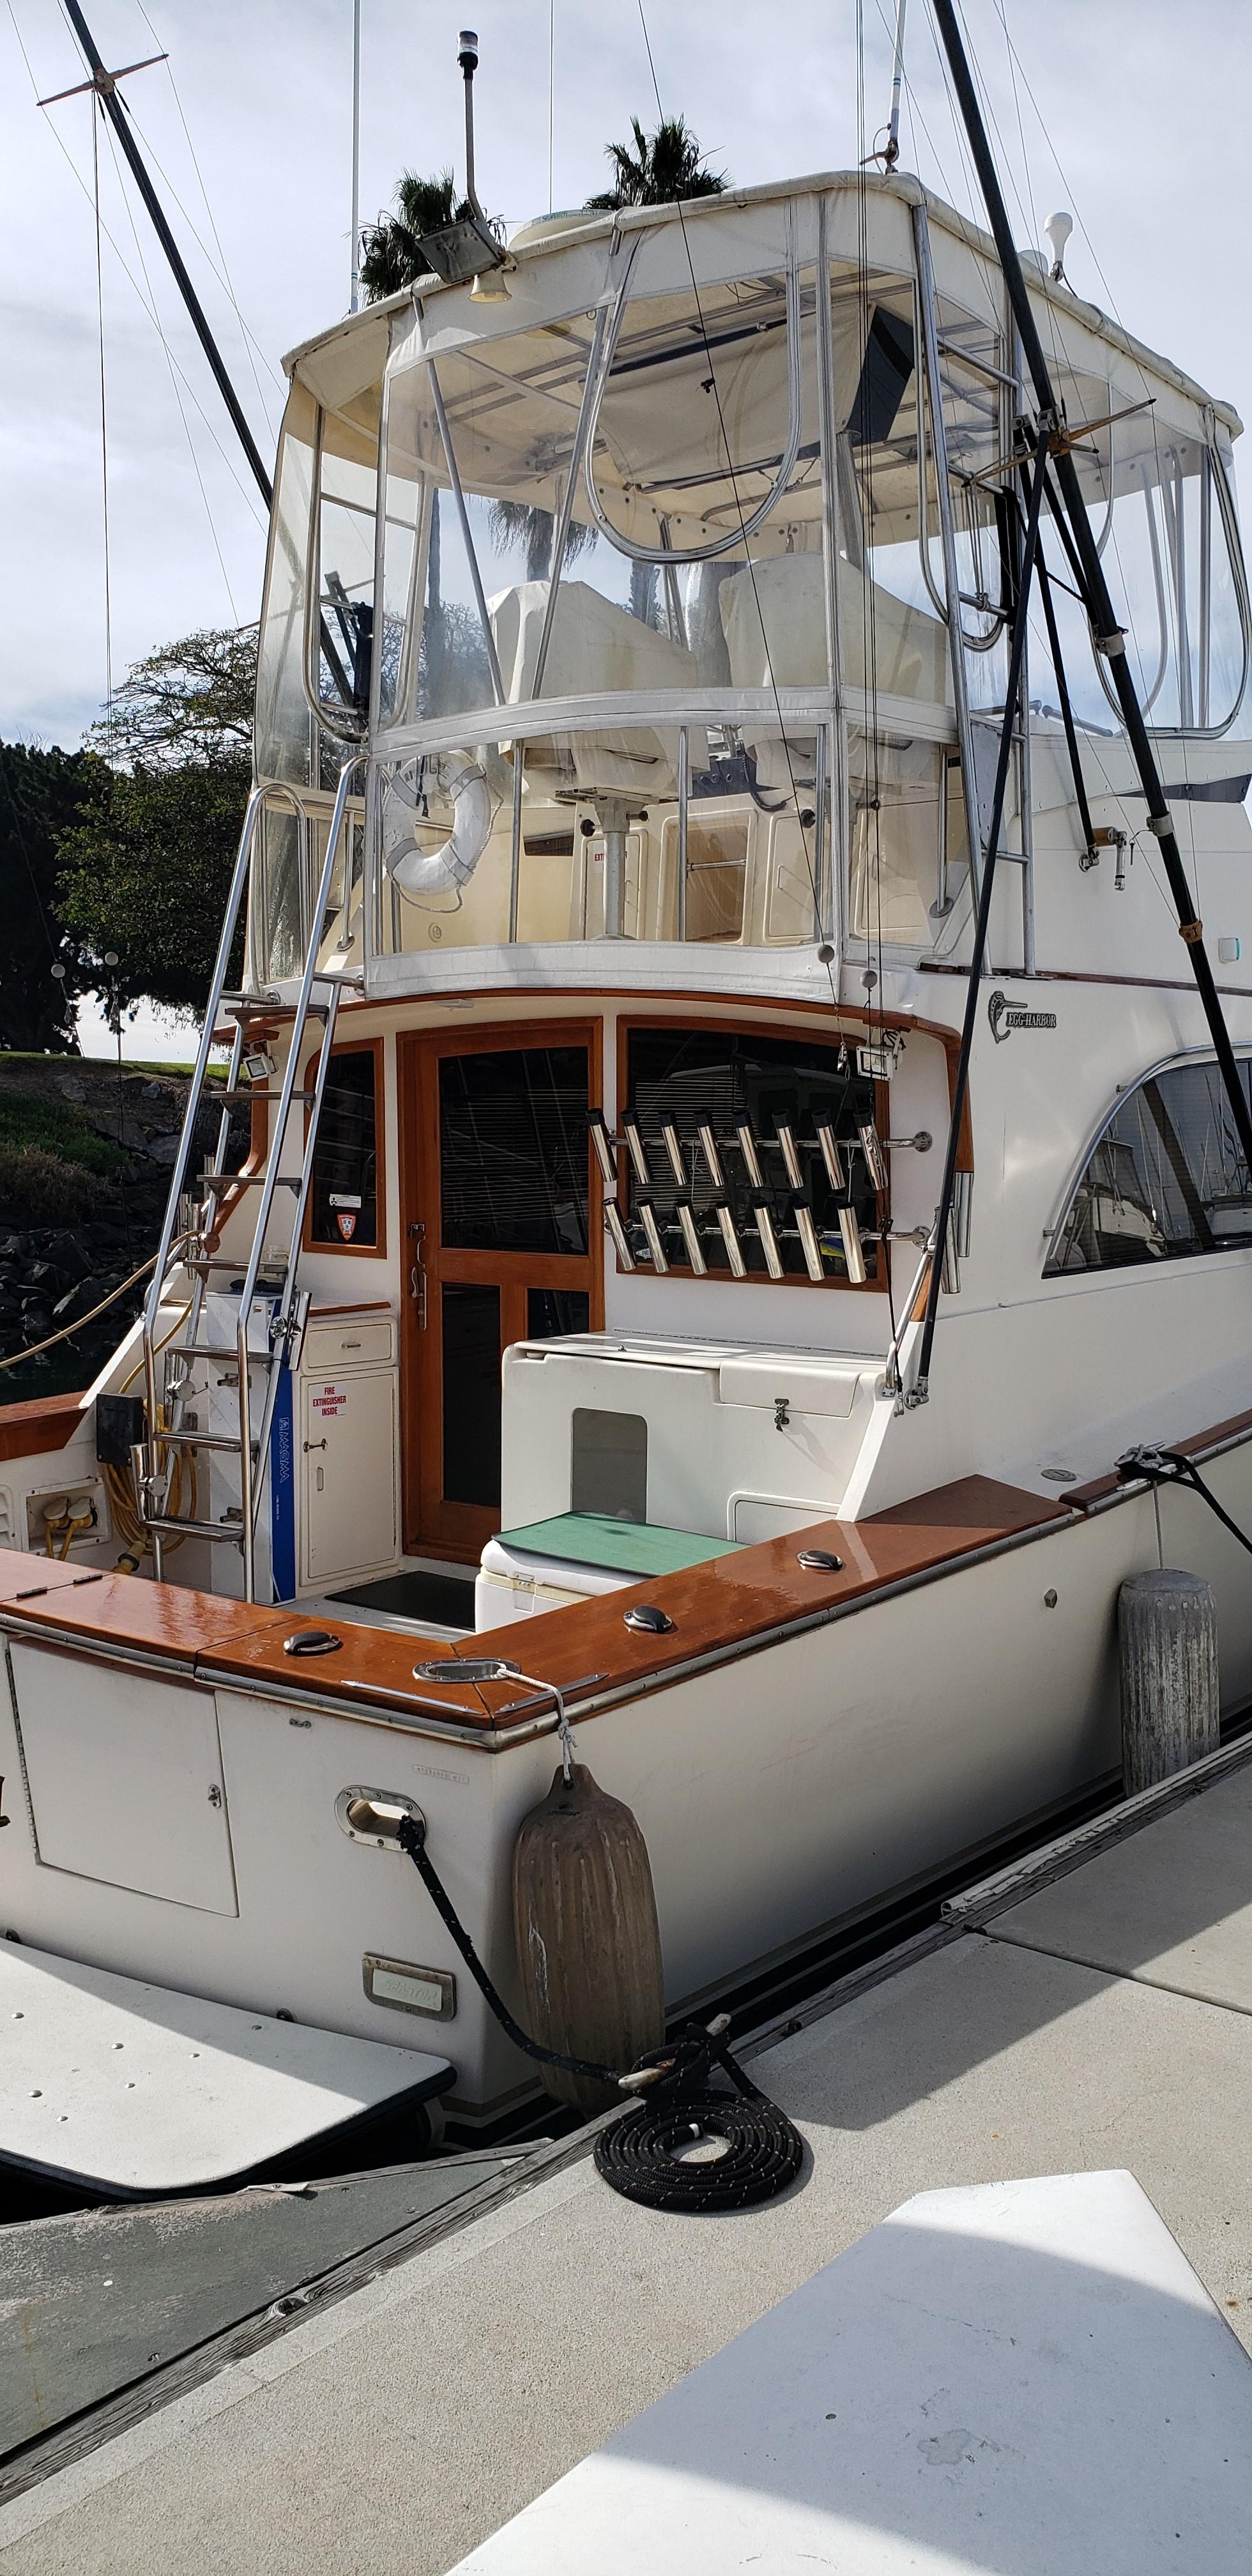 yachts for sale in san diego california